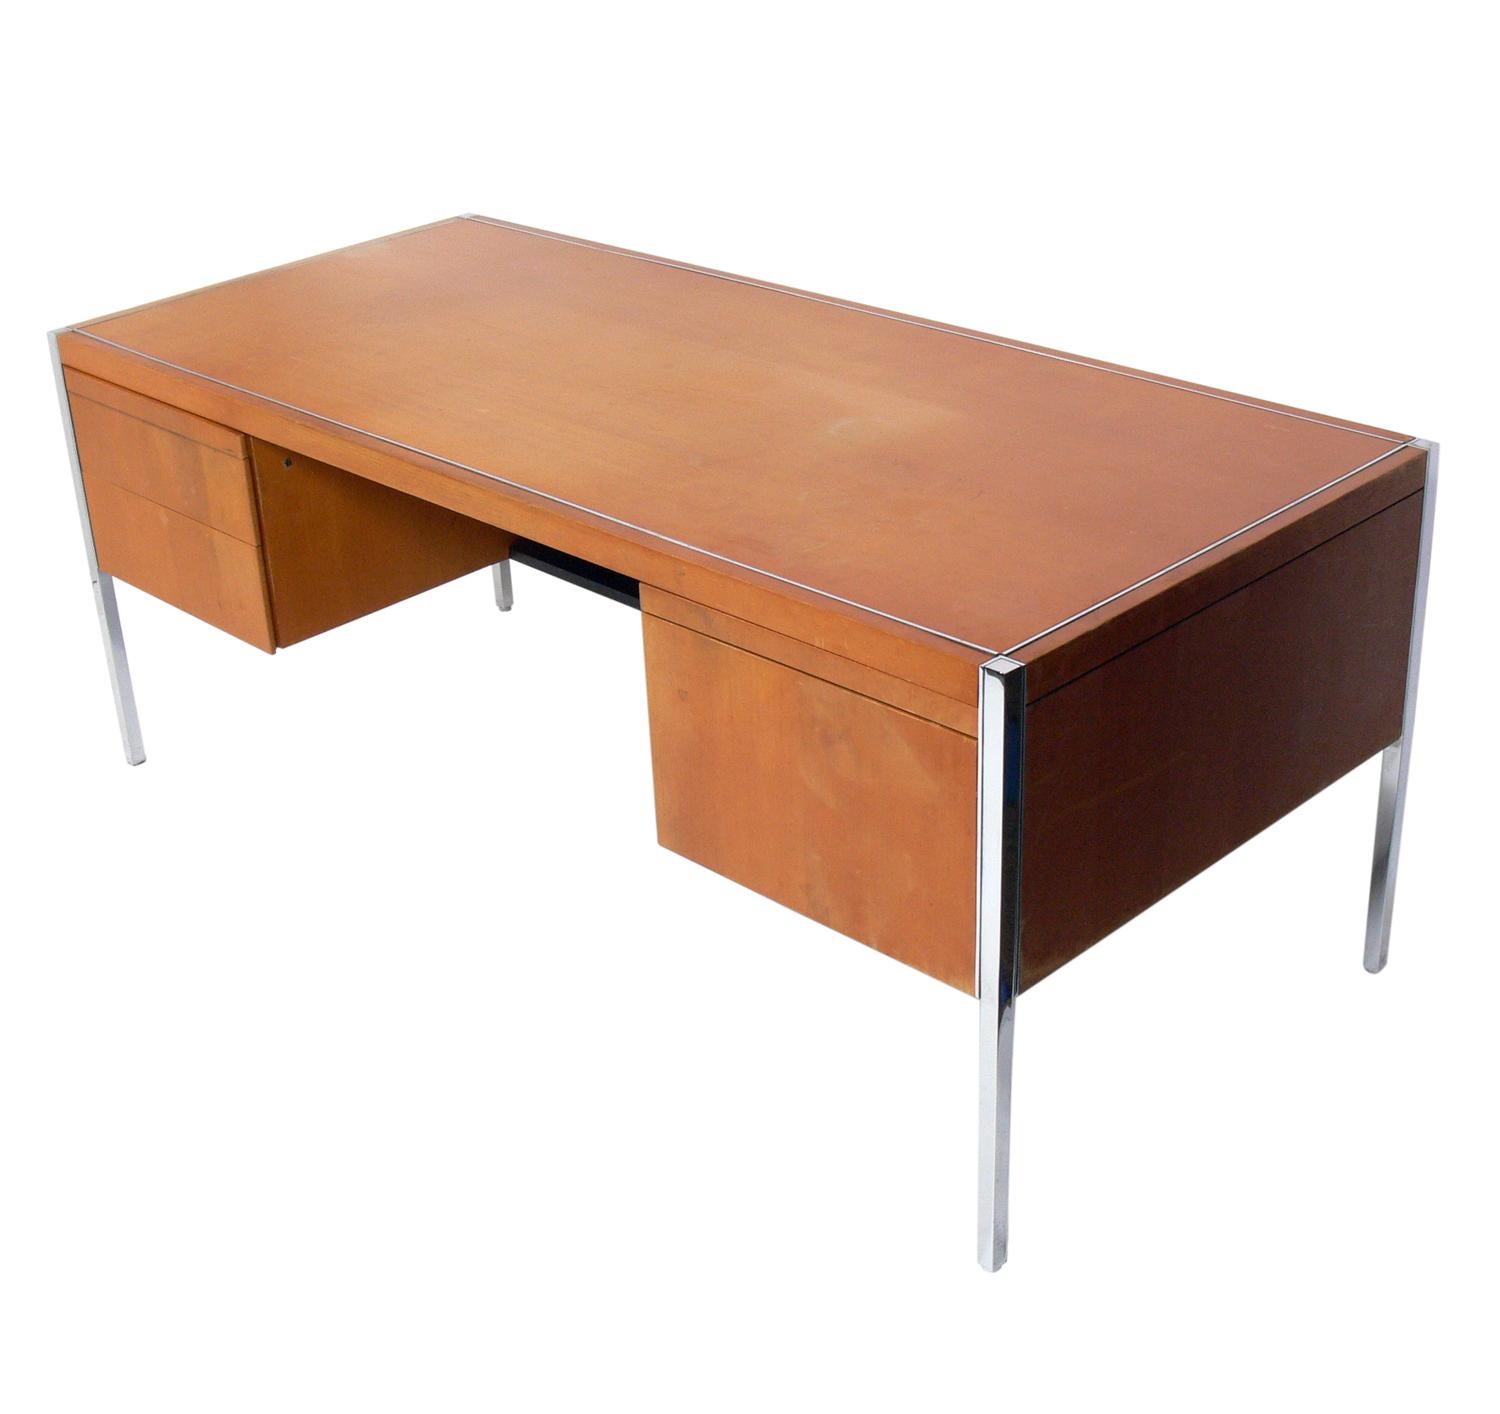 Clean lined executive desk, by Knoll, American, circa 1970s. Retains Knoll label underneath. This desk is currently being refinished and can be completed in your choice of color. The price noted below includes refinishing in your choice of color. It